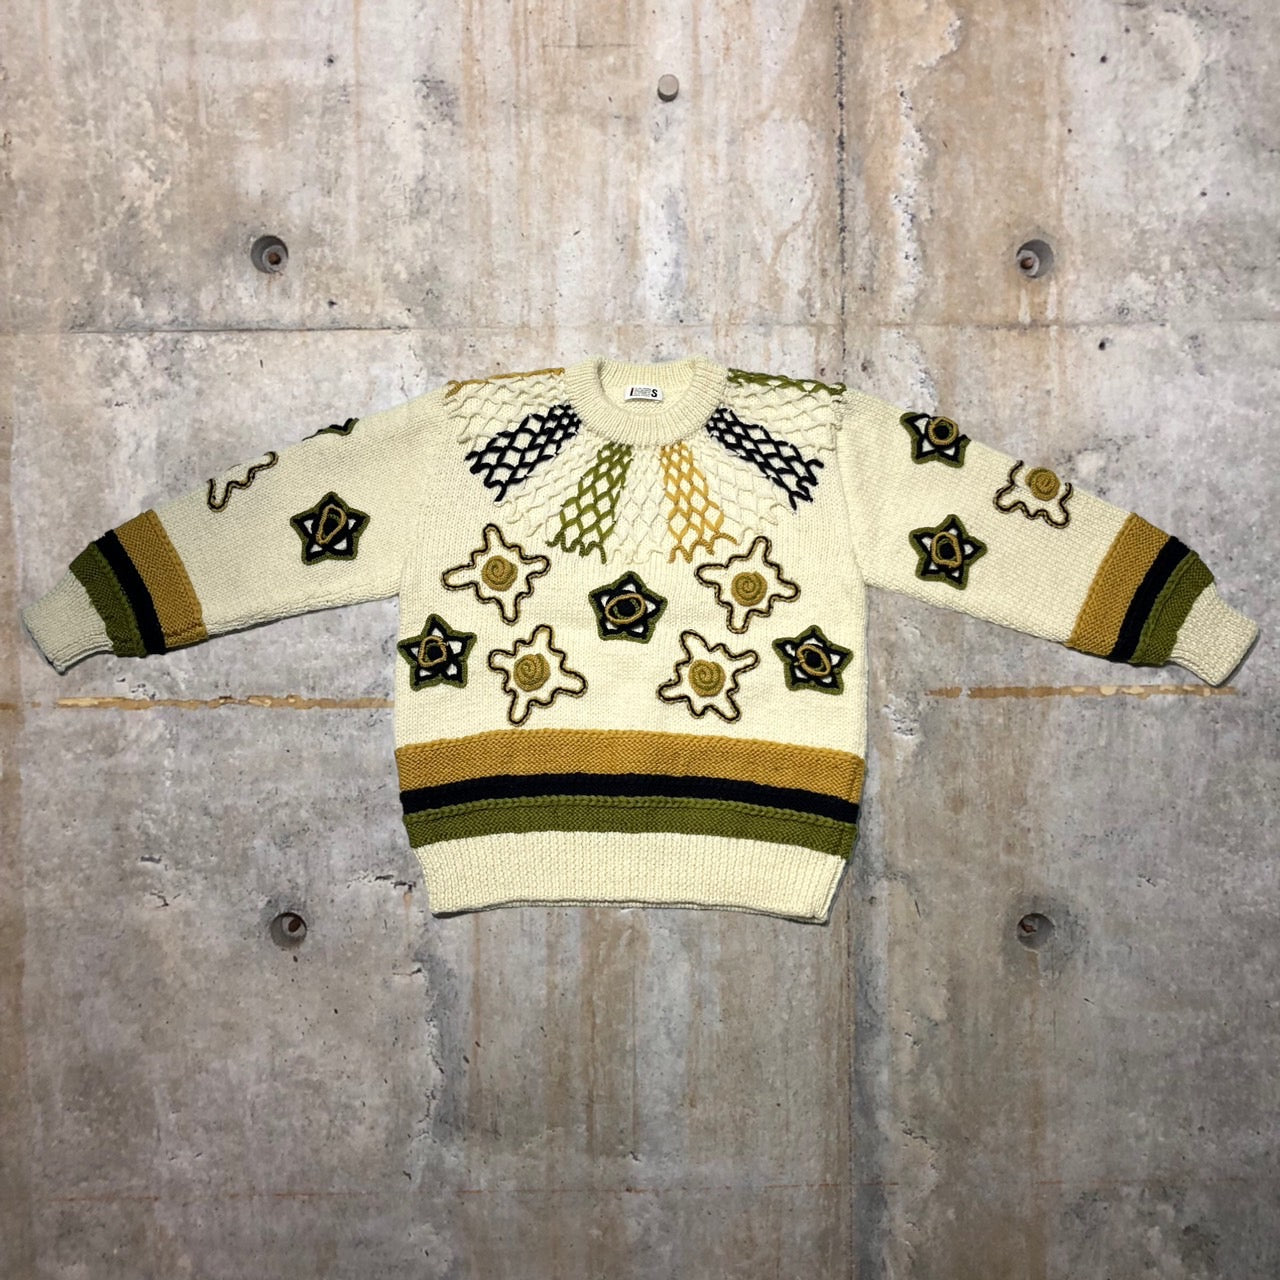 i.s. ISSEY MIYAKE(アイエス イッセイミヤケ) 90’s motif embroidery knit/刺繍ニット IS13-KN005 M マルチ IS